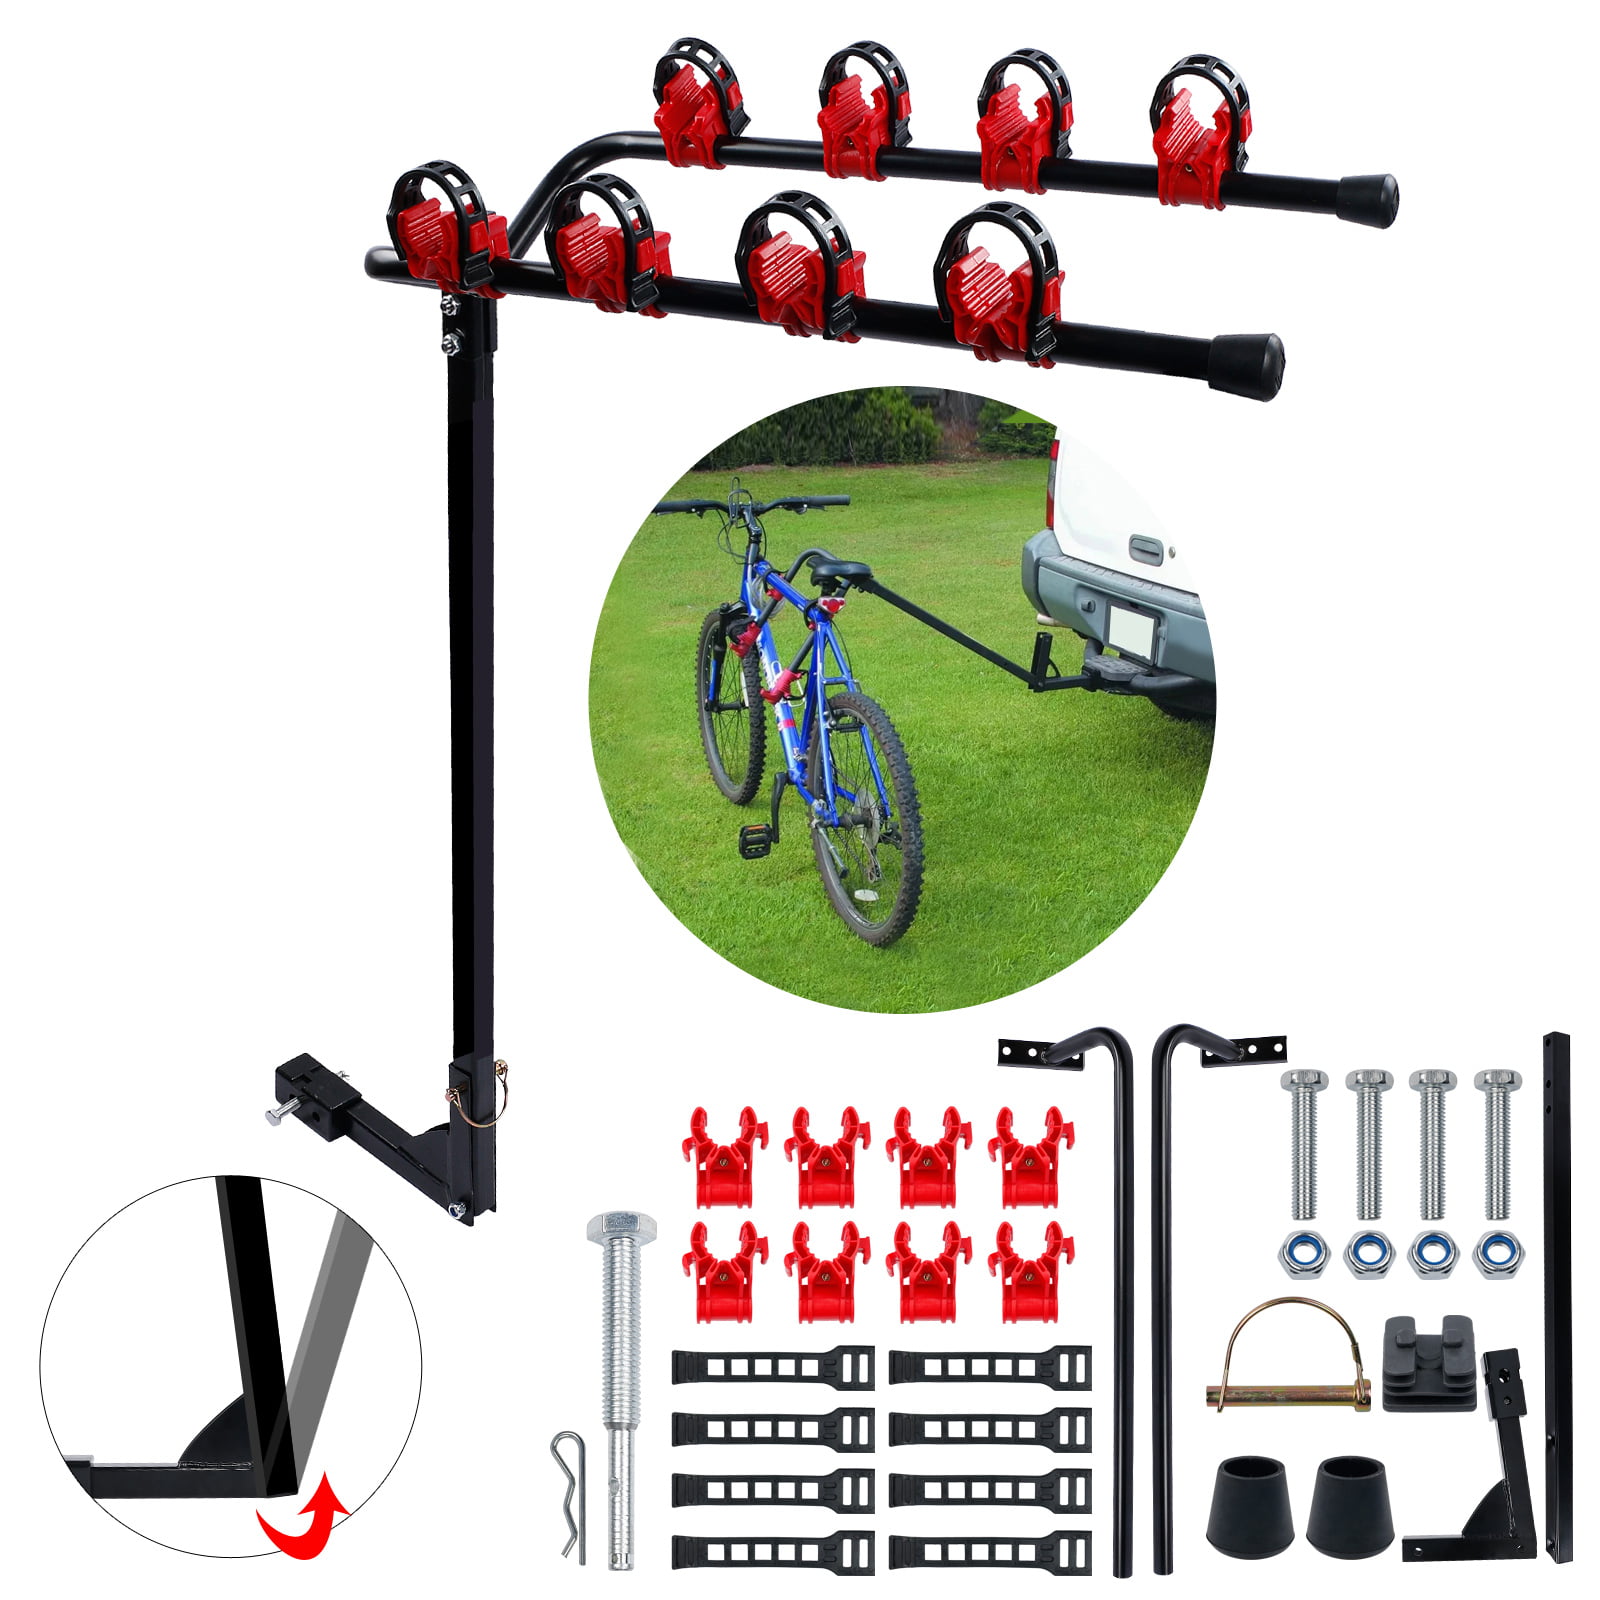 Details about   70210 4-Bike Deluxe Hitch Mount Rack 